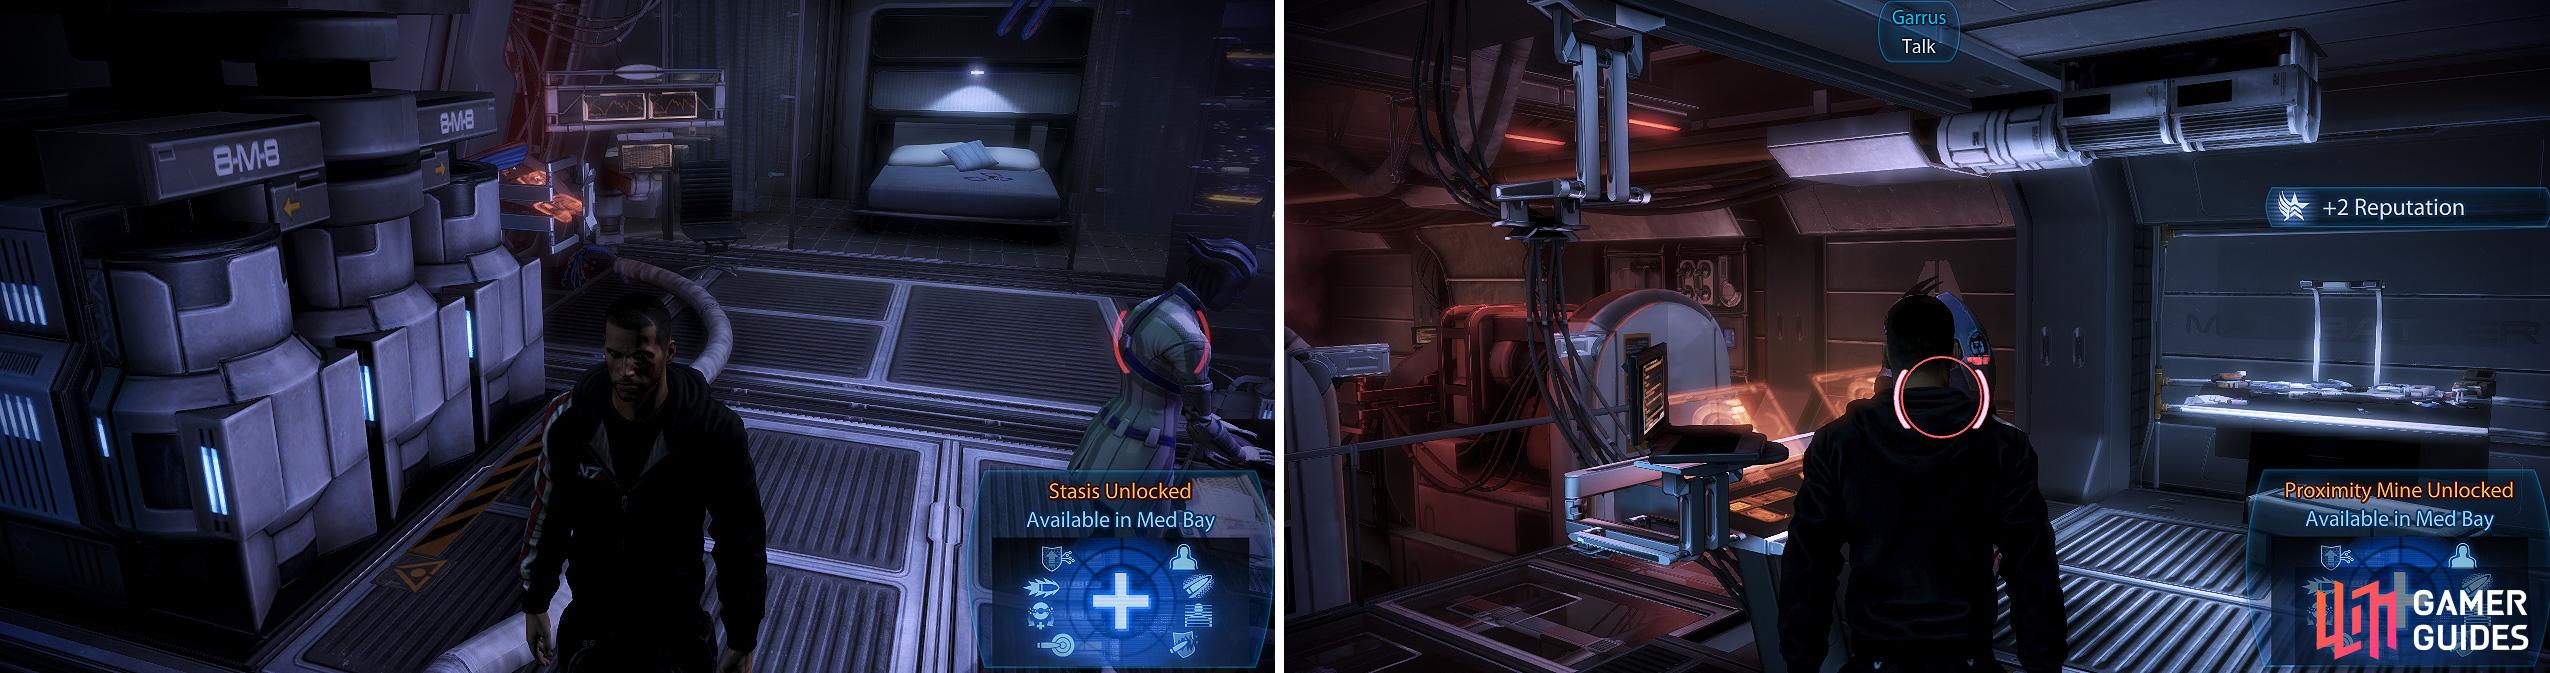 Speaking to Garrus unlocks his Proximity Mine skill provided you’ve diligently spoken to him between missions (right) as well as Liara’s Stasis skill (left).